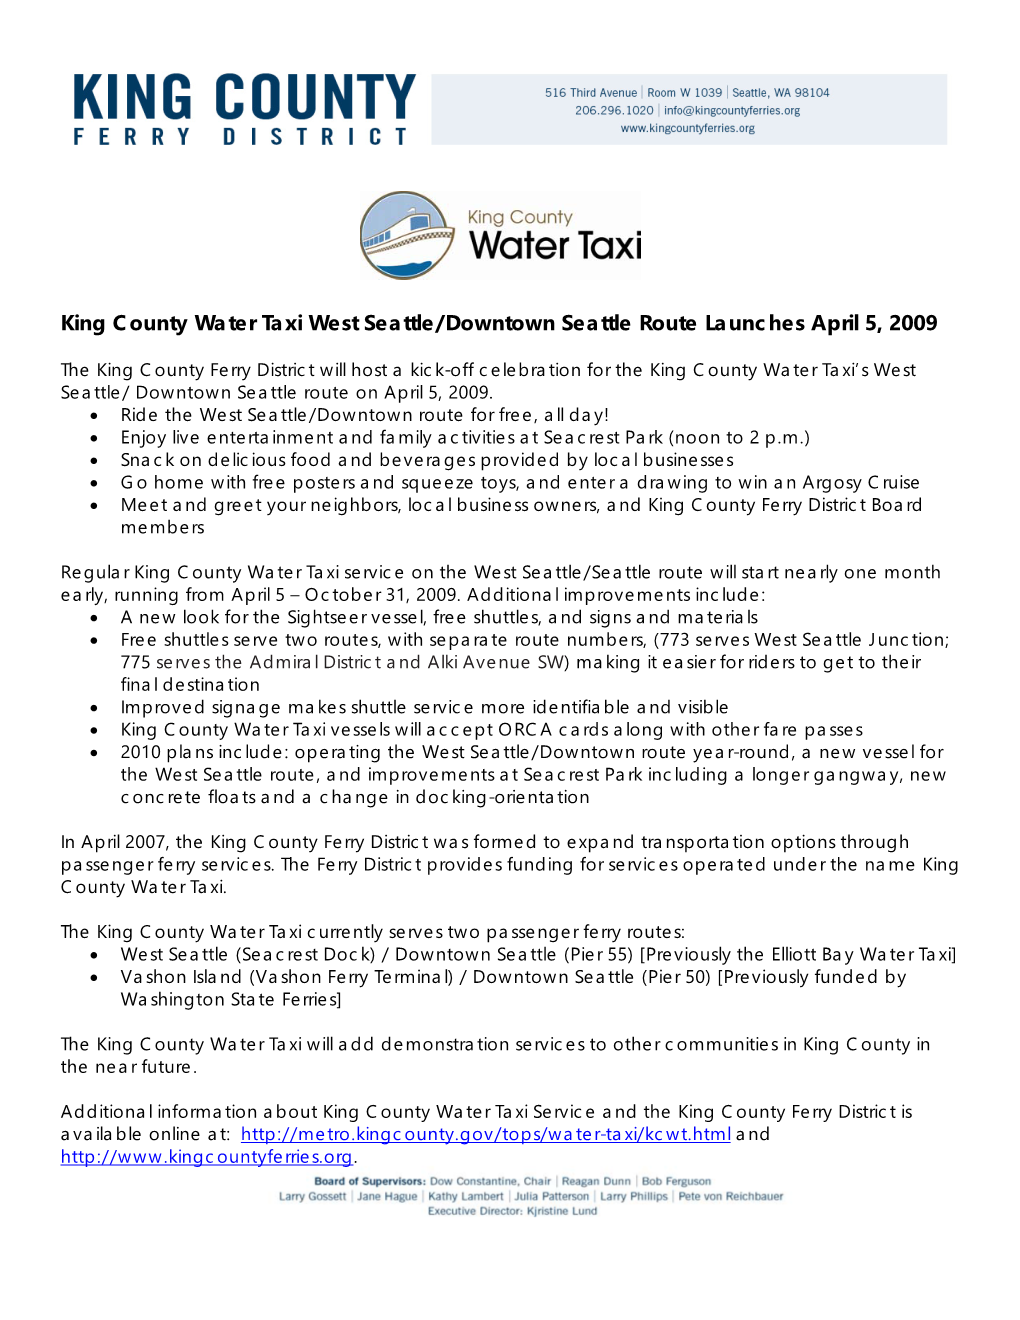 King County Water Taxi West Seattle/Downtown Seattle Route Launches April 5, 2009